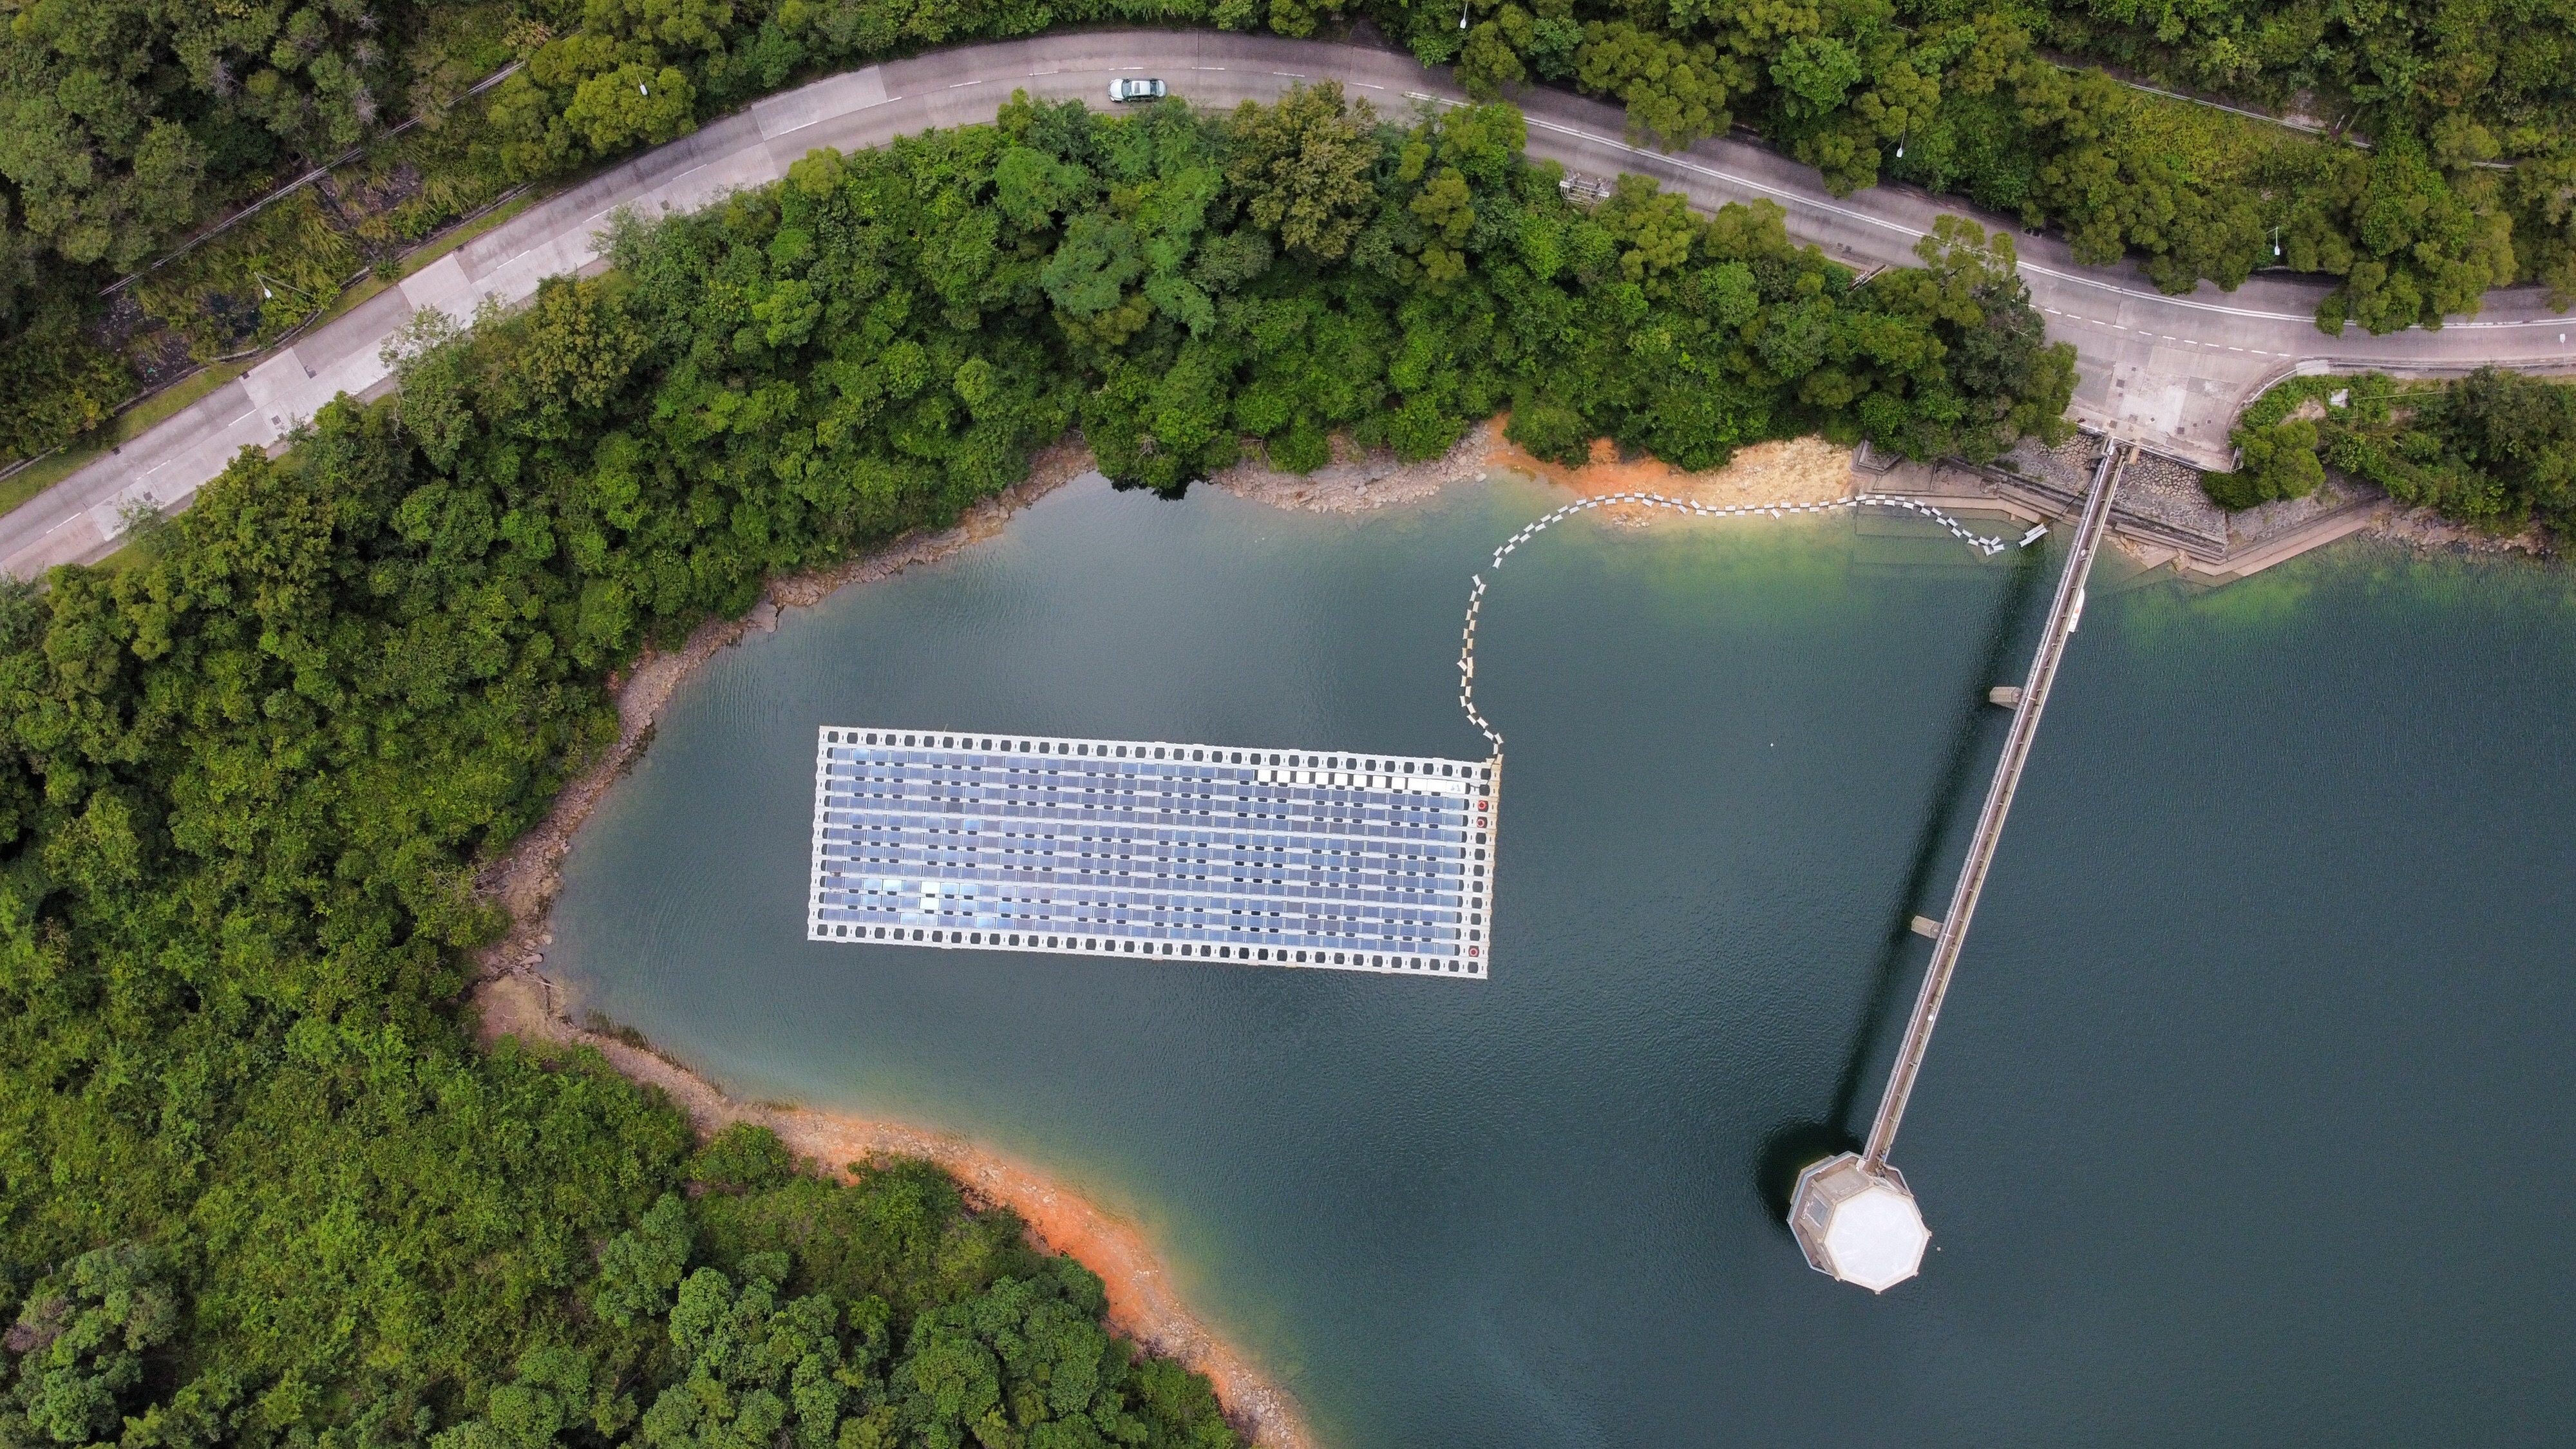 Hong Kong has installed small floating solar farms at the Shek Pik and Plover Cove Reservoirs to collect data for similar large-scale projects in the future. Photo: Martin Chan